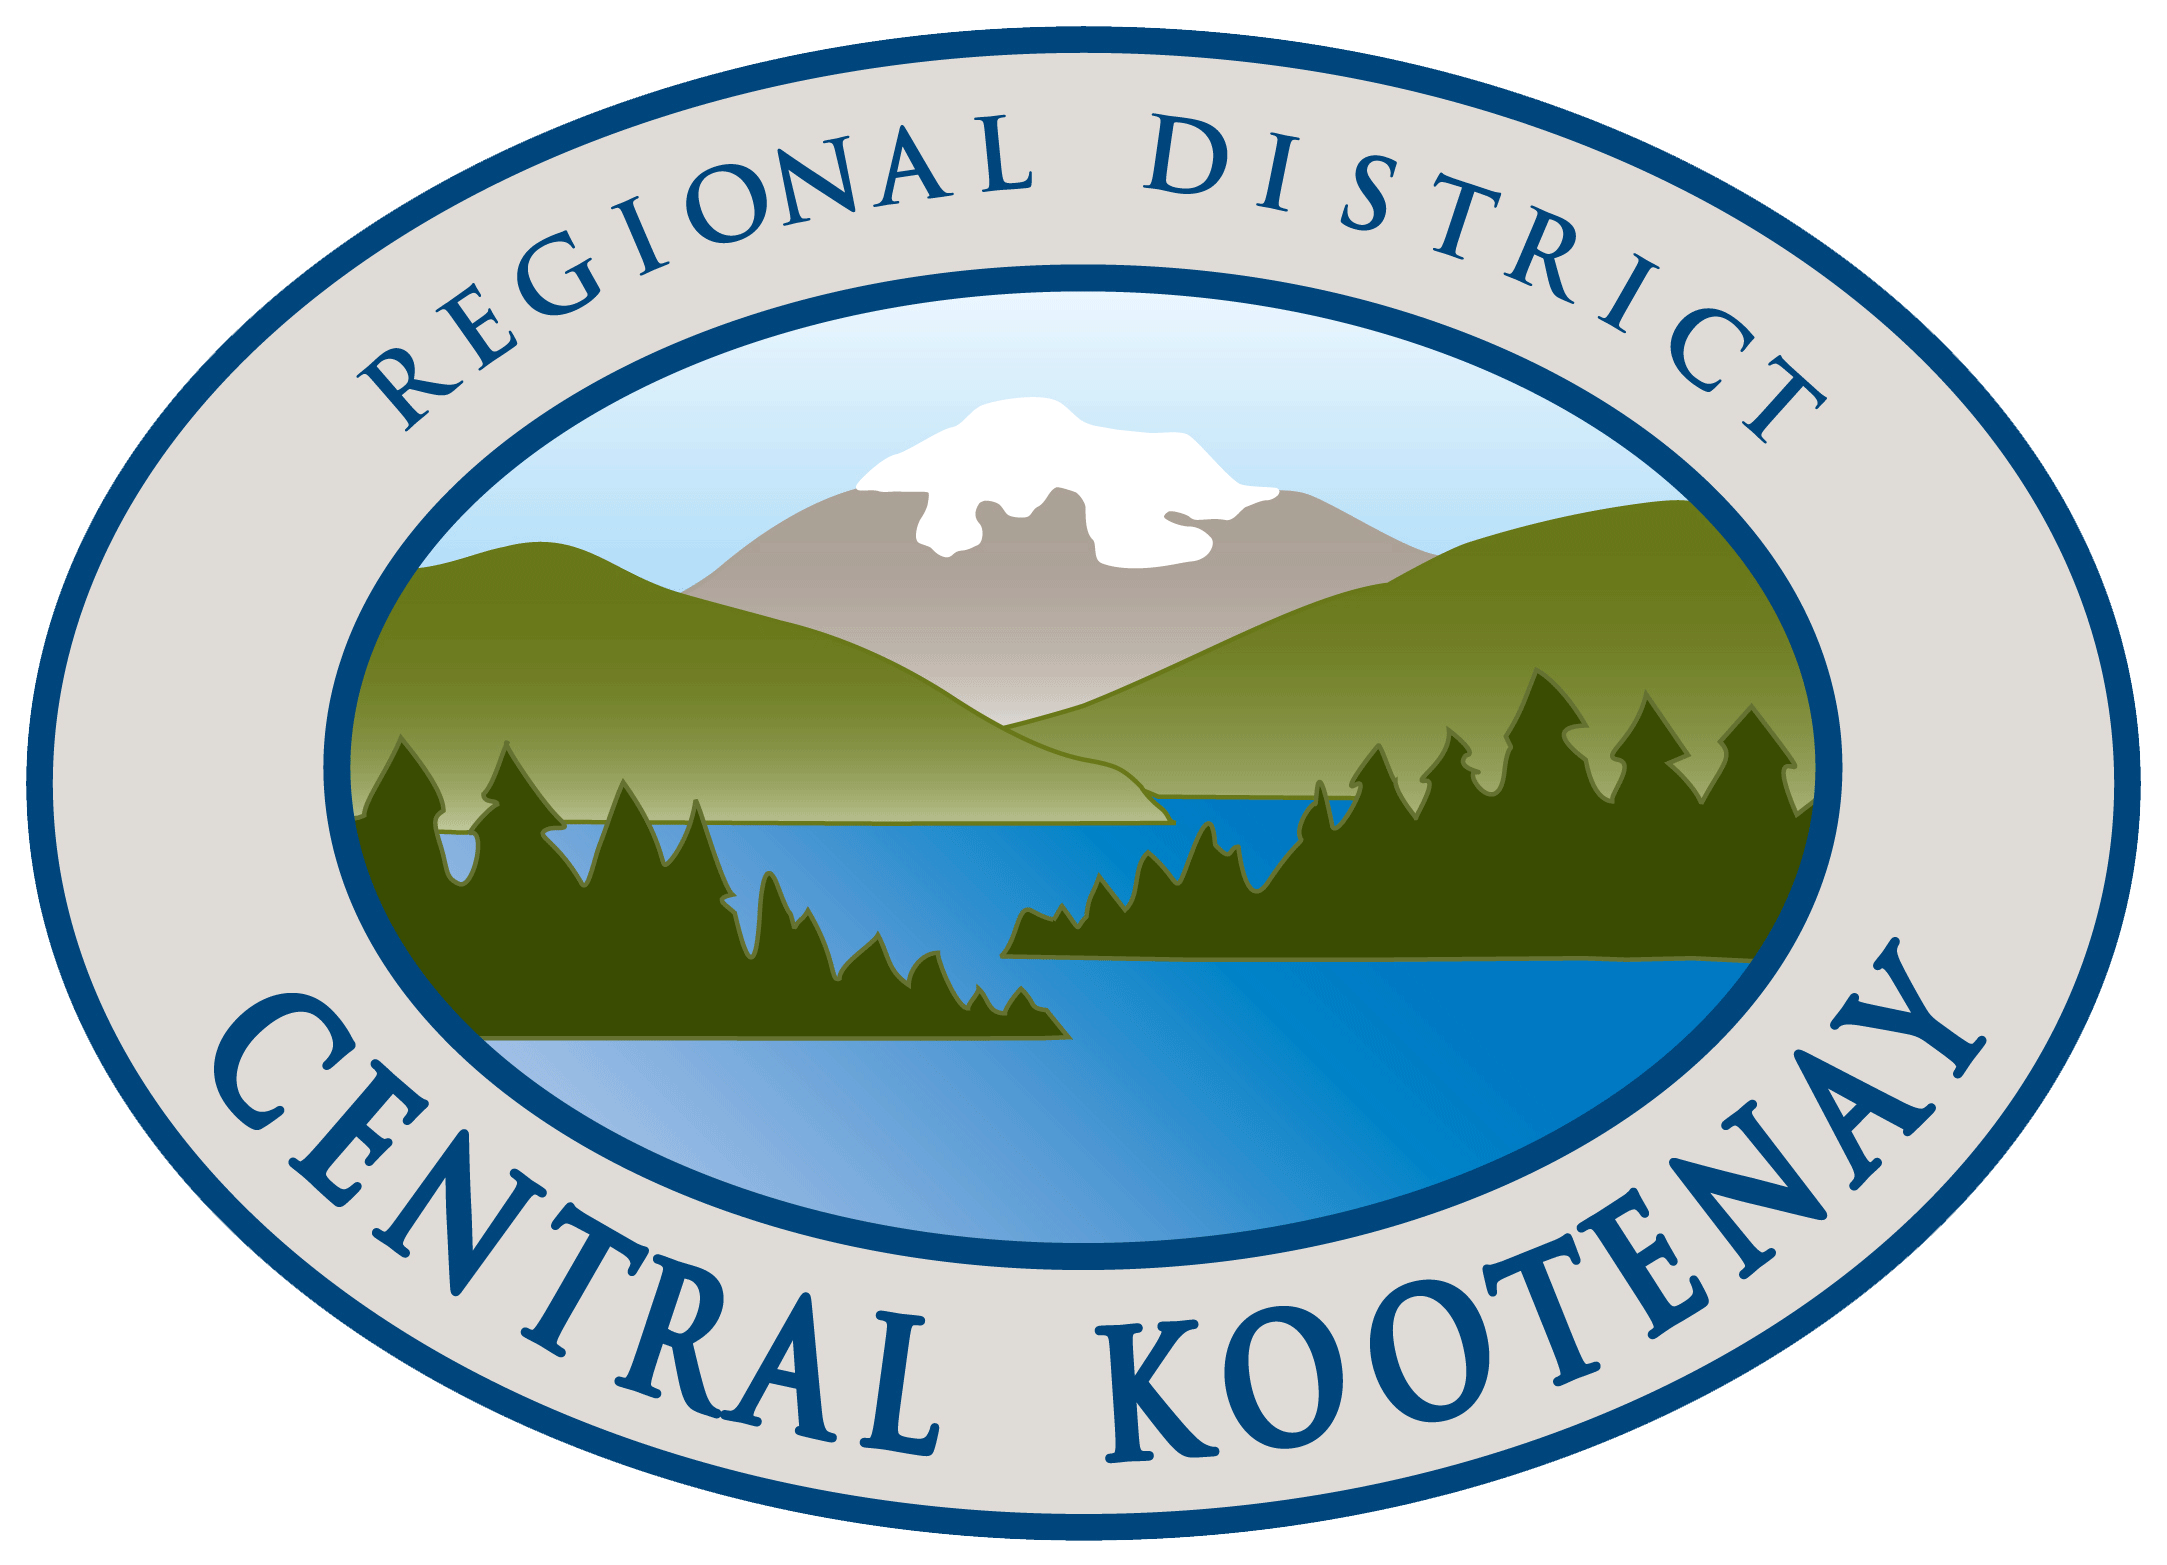 regional-district-of-central-kootenay